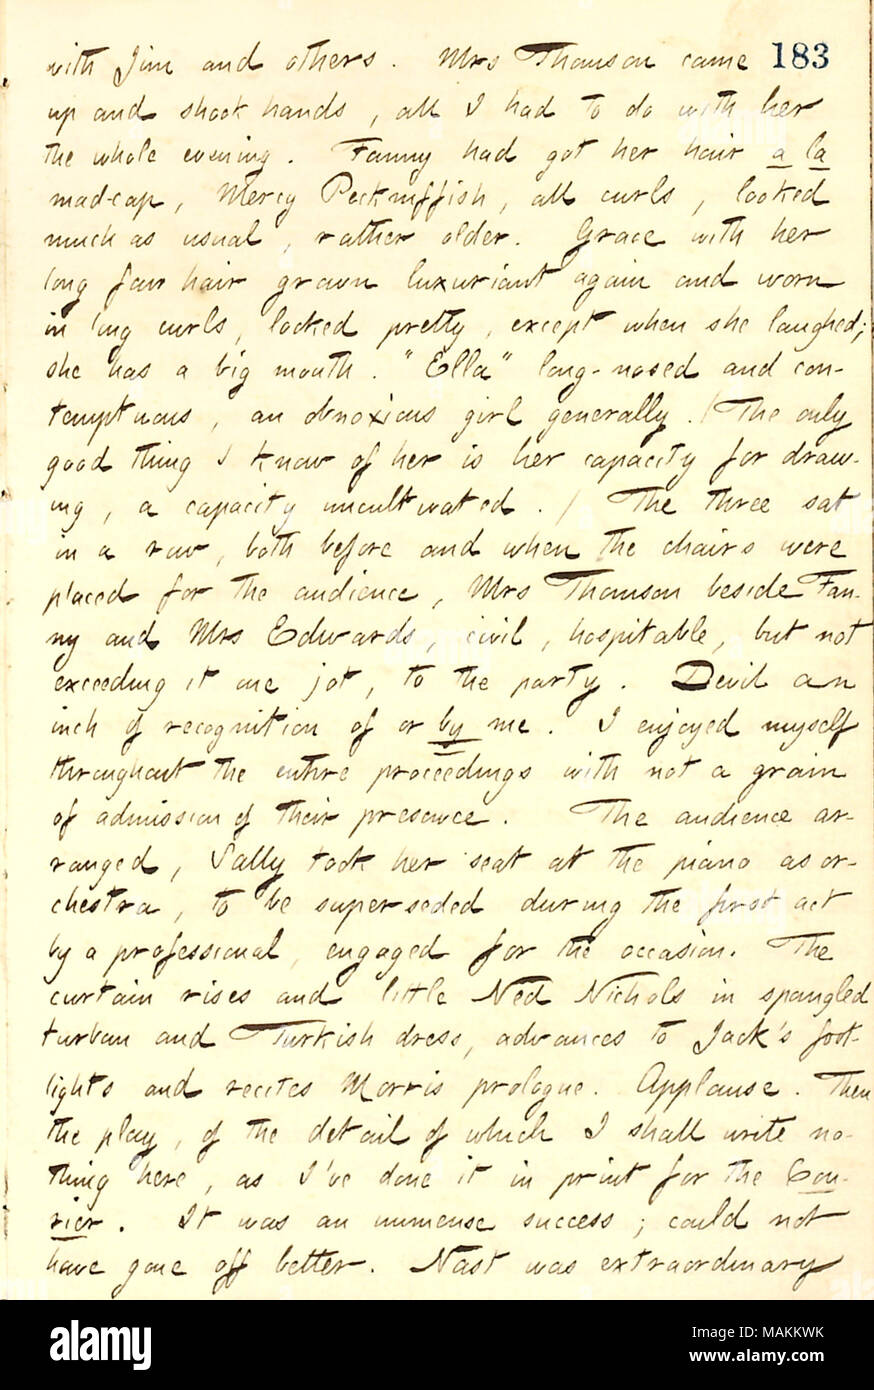 Describes the Edwards family's Christmas party.  Transcription: with Jim [Parton] and others. Mrs [Sophy] Thomson came up and shook hands, all I had to do with her the whole evening. Fanny [Fern] had got her hair a la mad-cap, Mercy Pecksniffish, all curls, looked much as usual, rather older. Grace [Eldredge] with her long fair hair grown luxuriant again and worn in long curls, looked pretty, except when she laughed, she has a big mouth. 'Ella' [Eldredge] long-nosed and contemptuous, an obnoxious girl generally. (The only good thing I know of her is her capacity for drawing, a capacity unculti Stock Photo